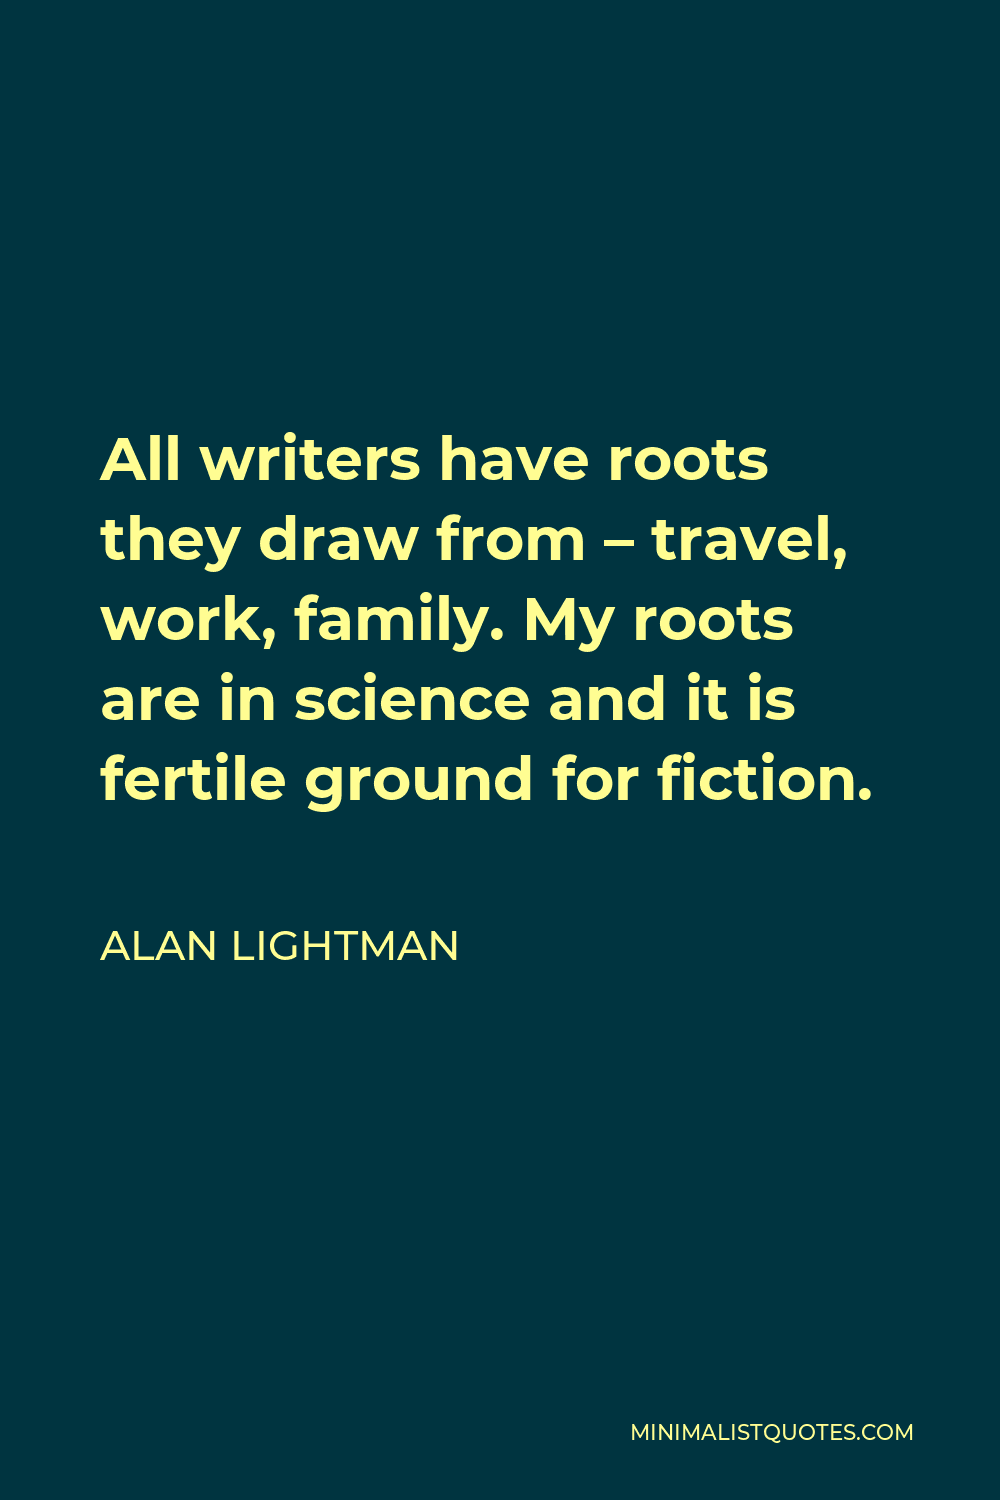 Alan Lightman Quote - All writers have roots they draw from – travel, work, family. My roots are in science and it is fertile ground for fiction.